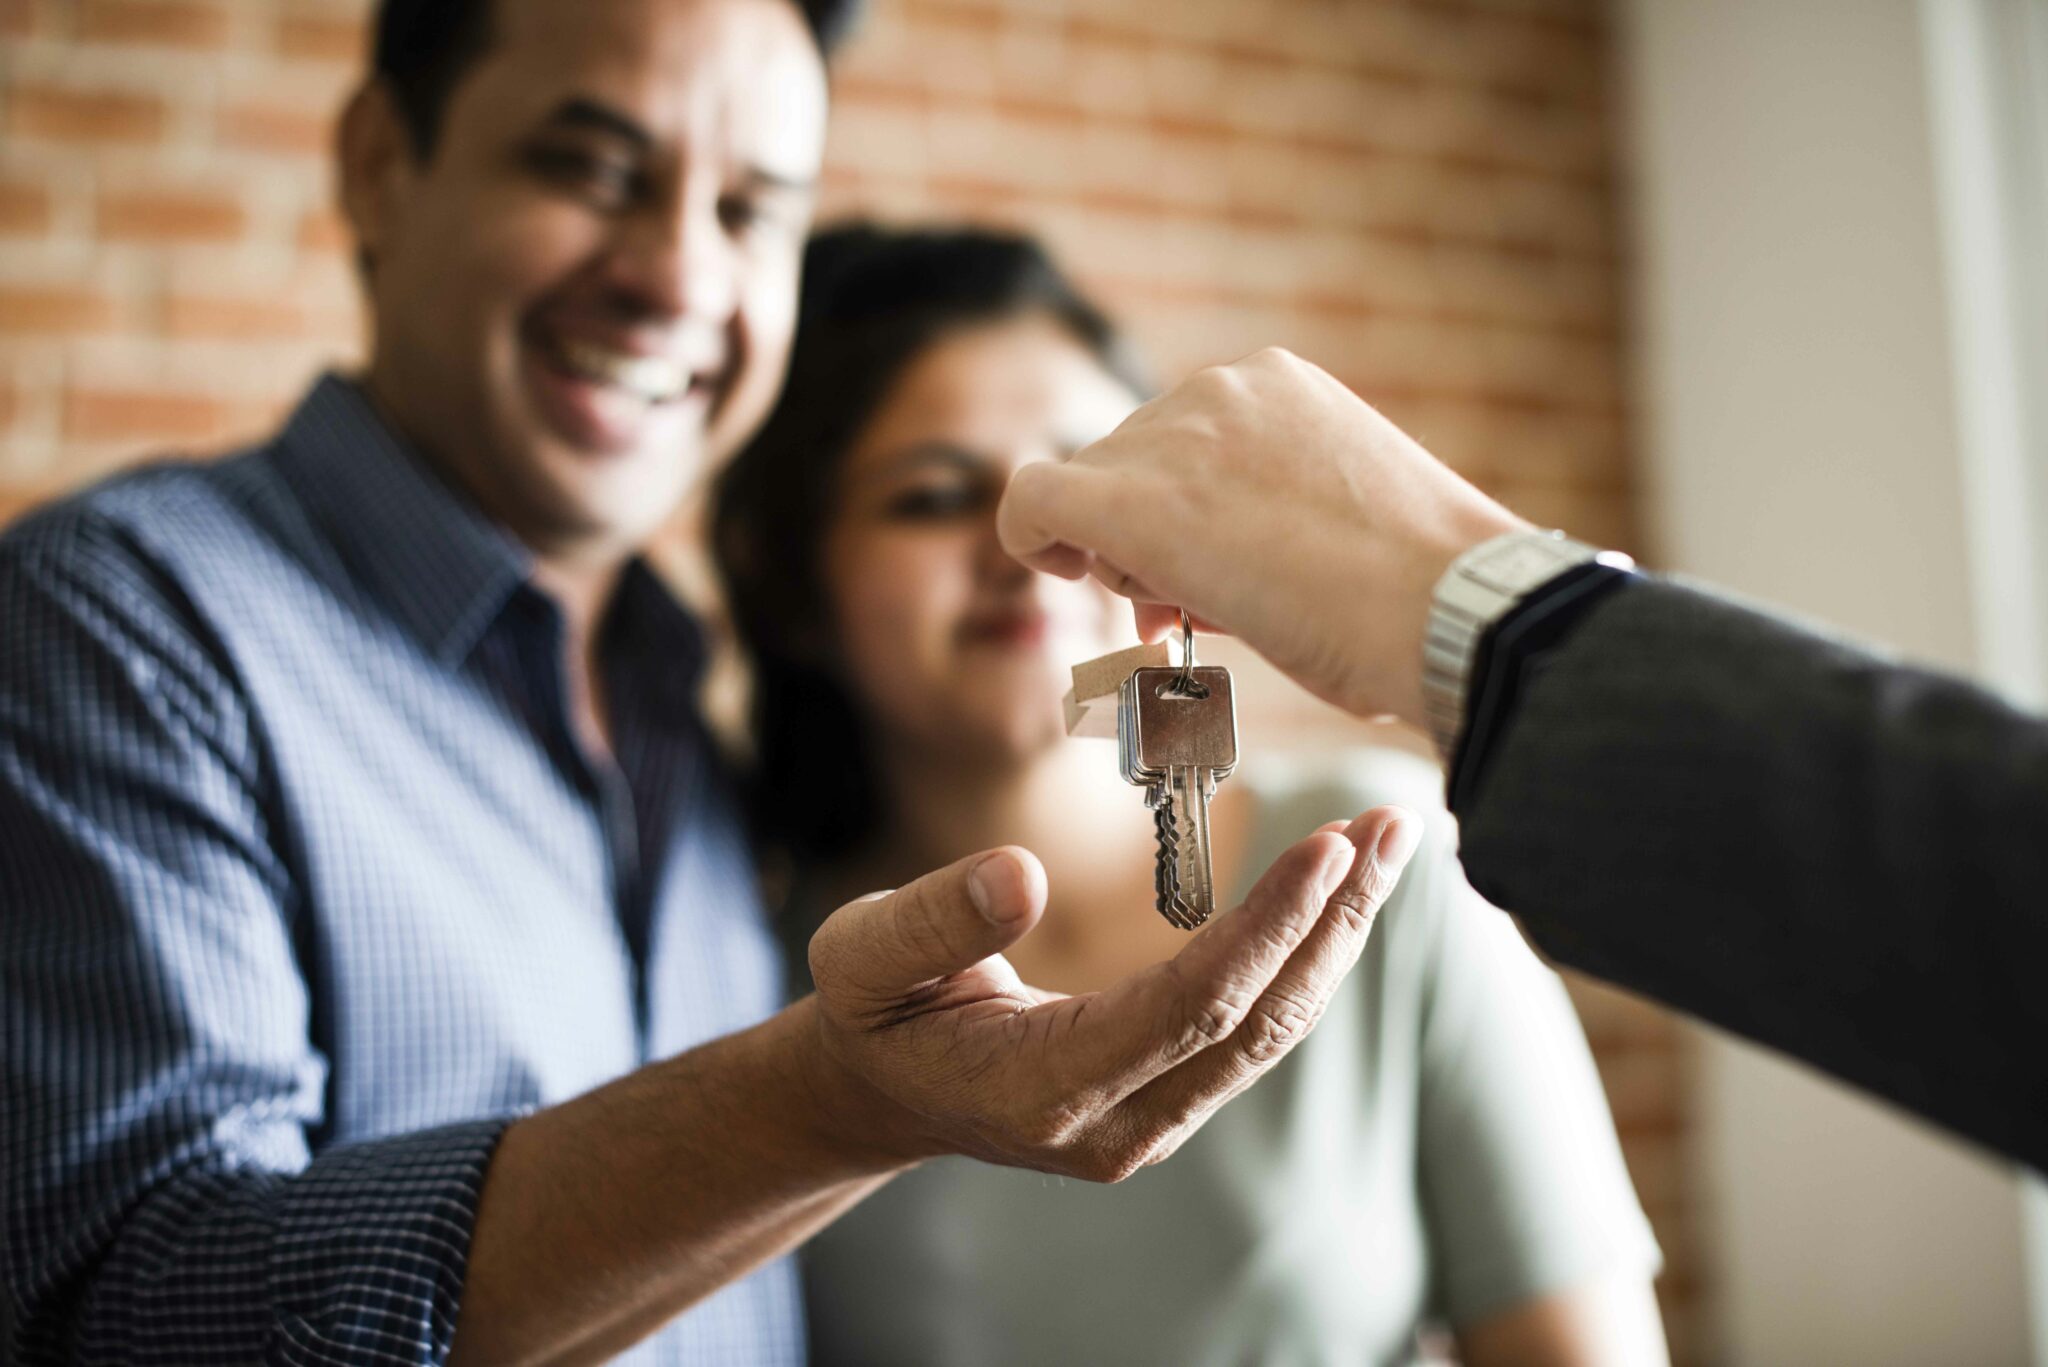 Don’t Be Afraid of Buying a Home